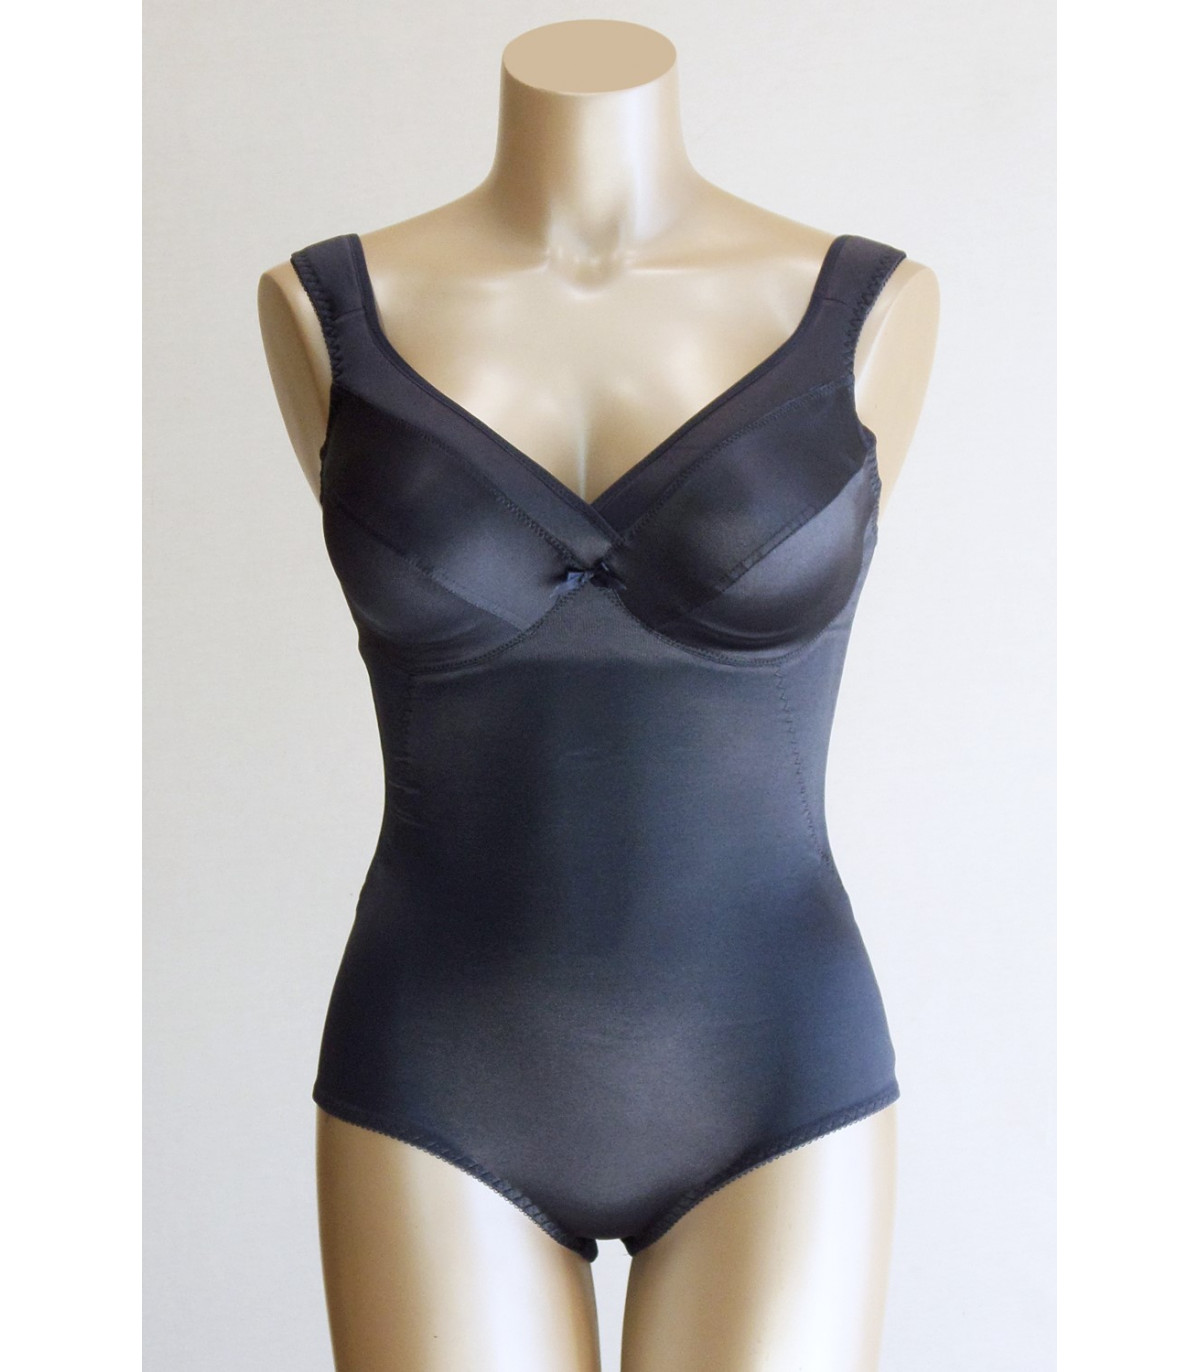 Underwired body in soft lycra, ideal inside thin clothes